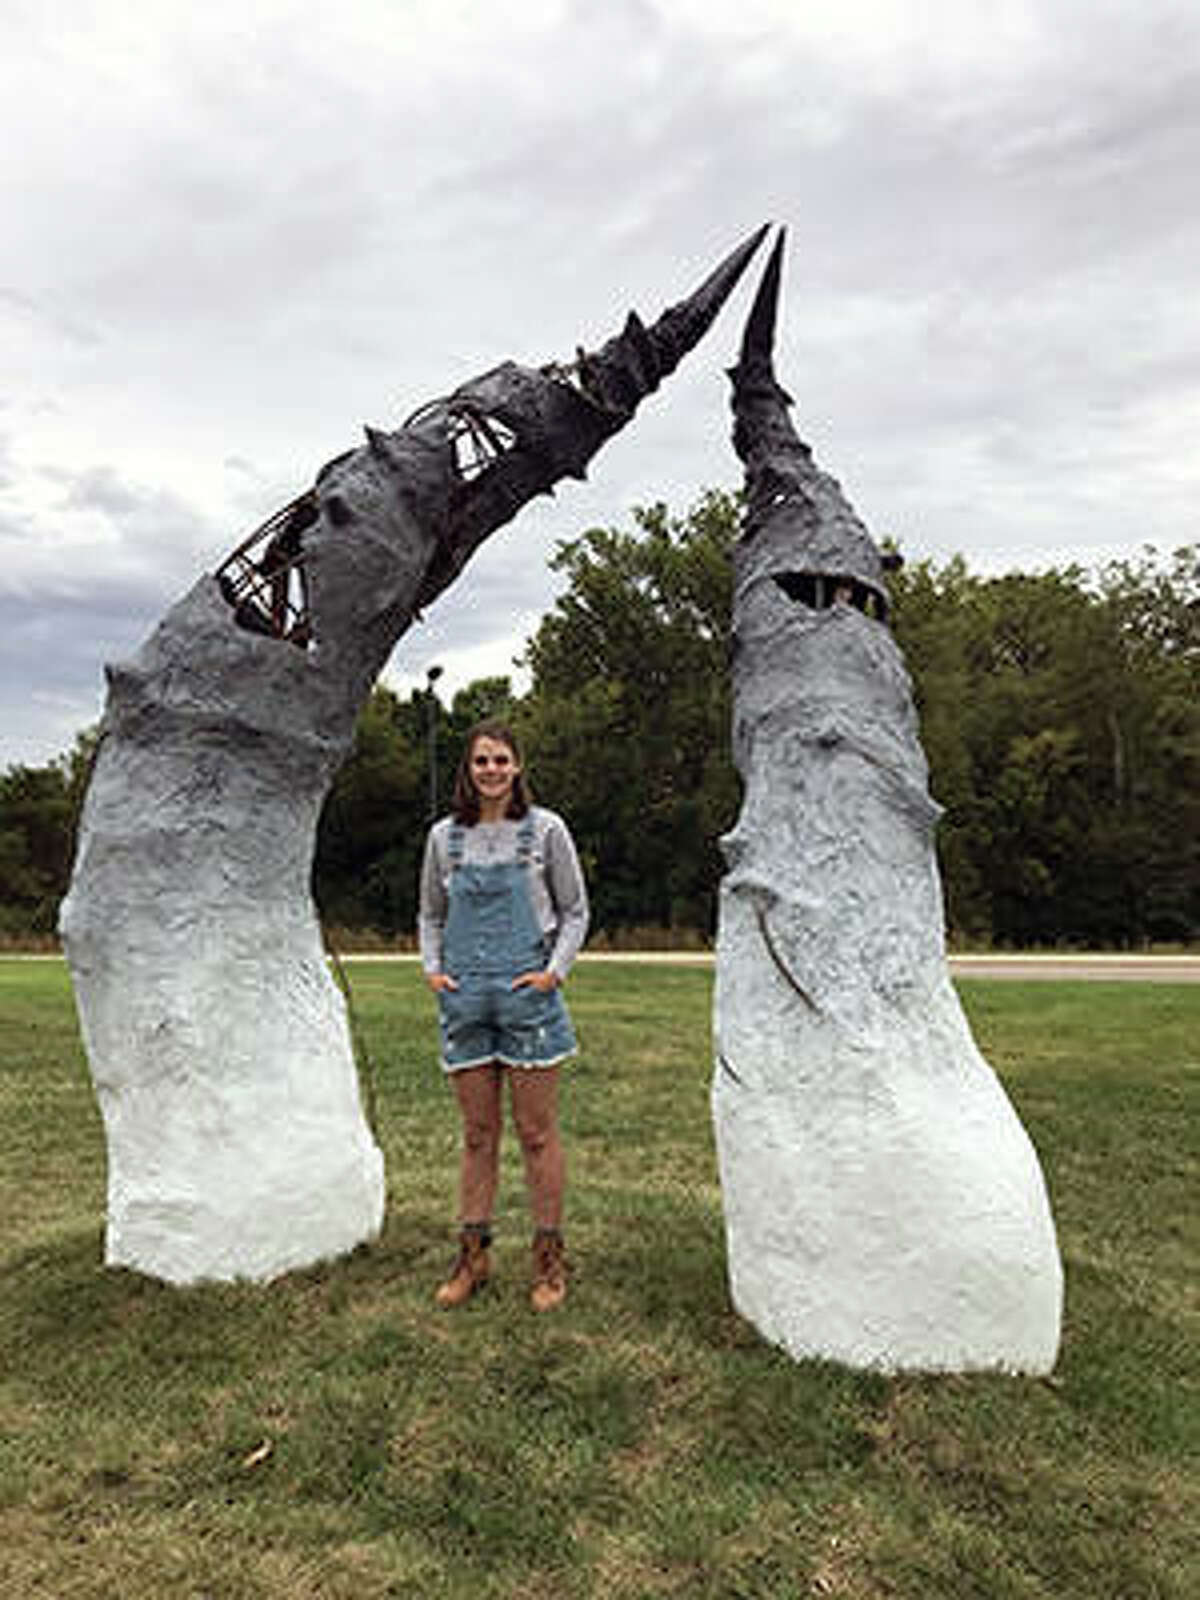 SIUE’s Abbi Ruppert stands by her installed sculpture “Revival.”